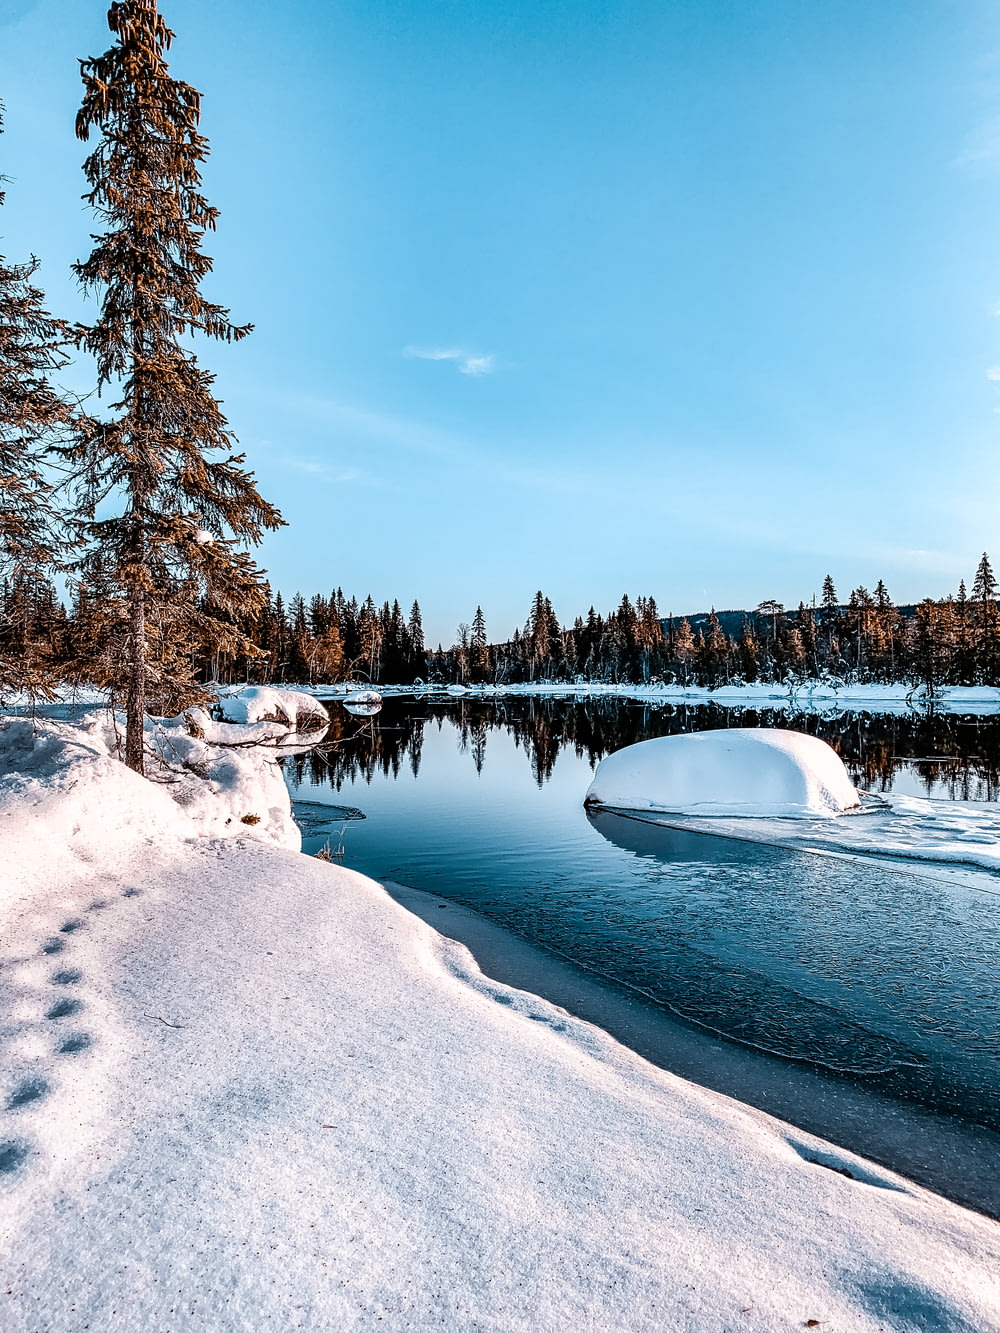 white boat on snow covered ground near trees during daytime